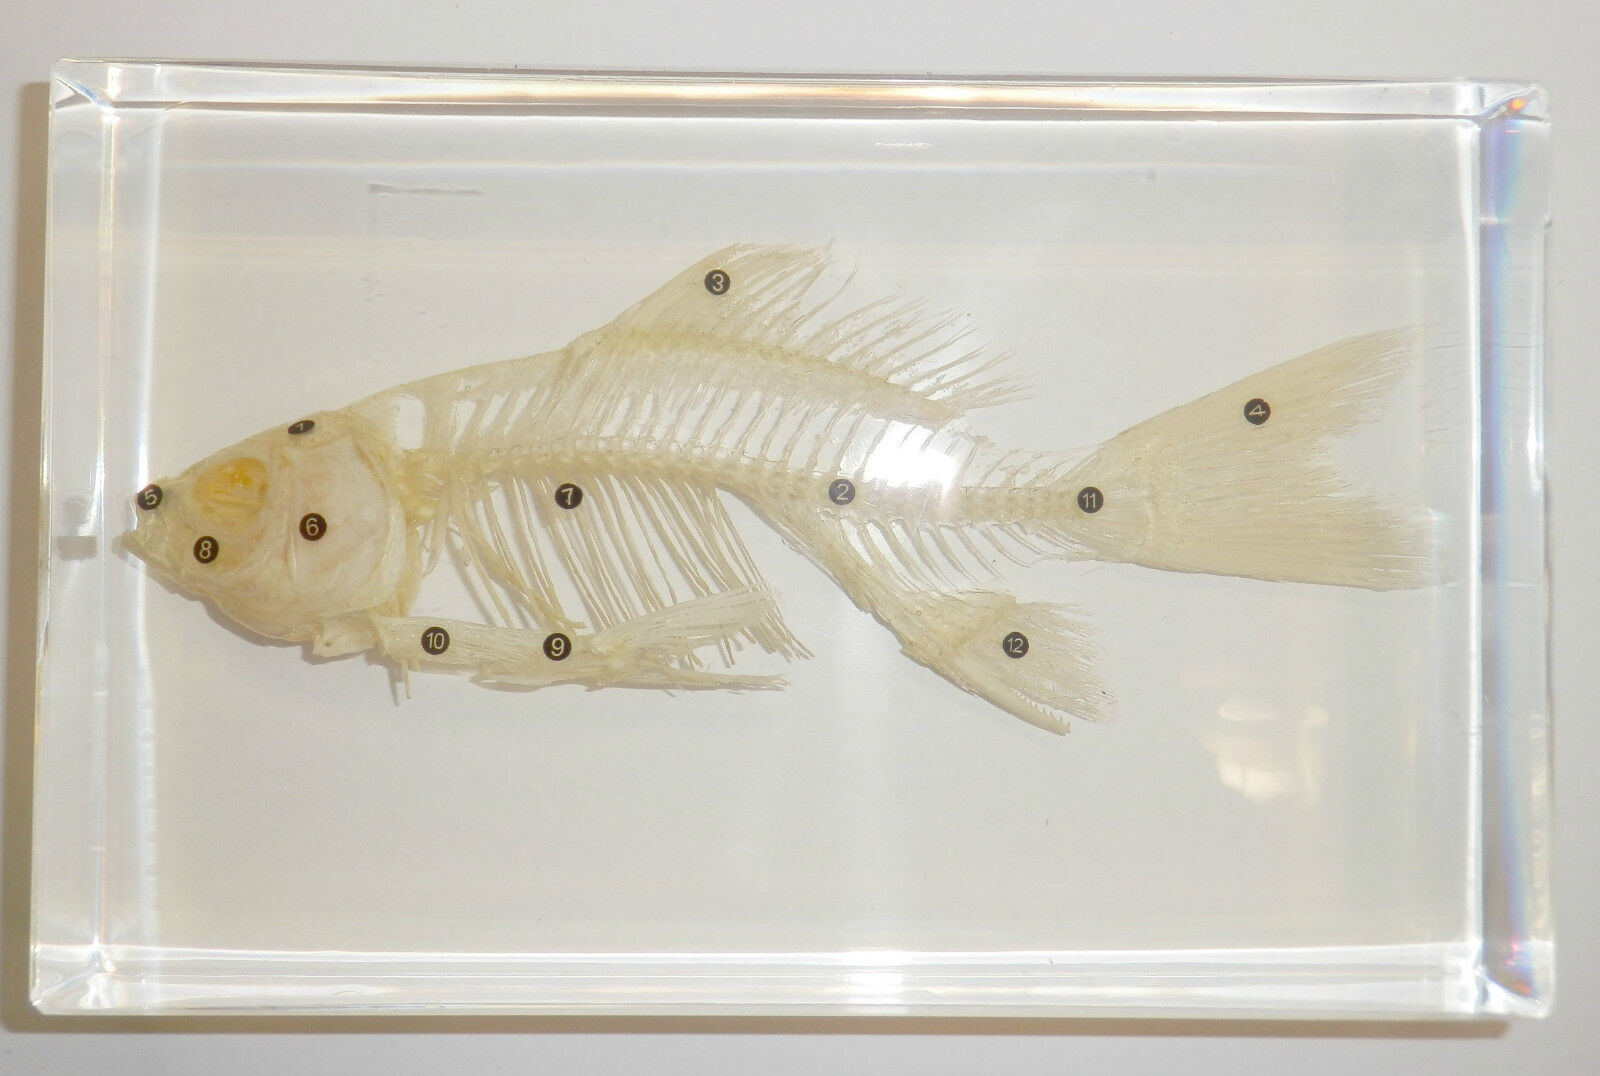 Fish Skeleton - Cold-water Goldfish (12 parts labeled) : Very Large - Clear